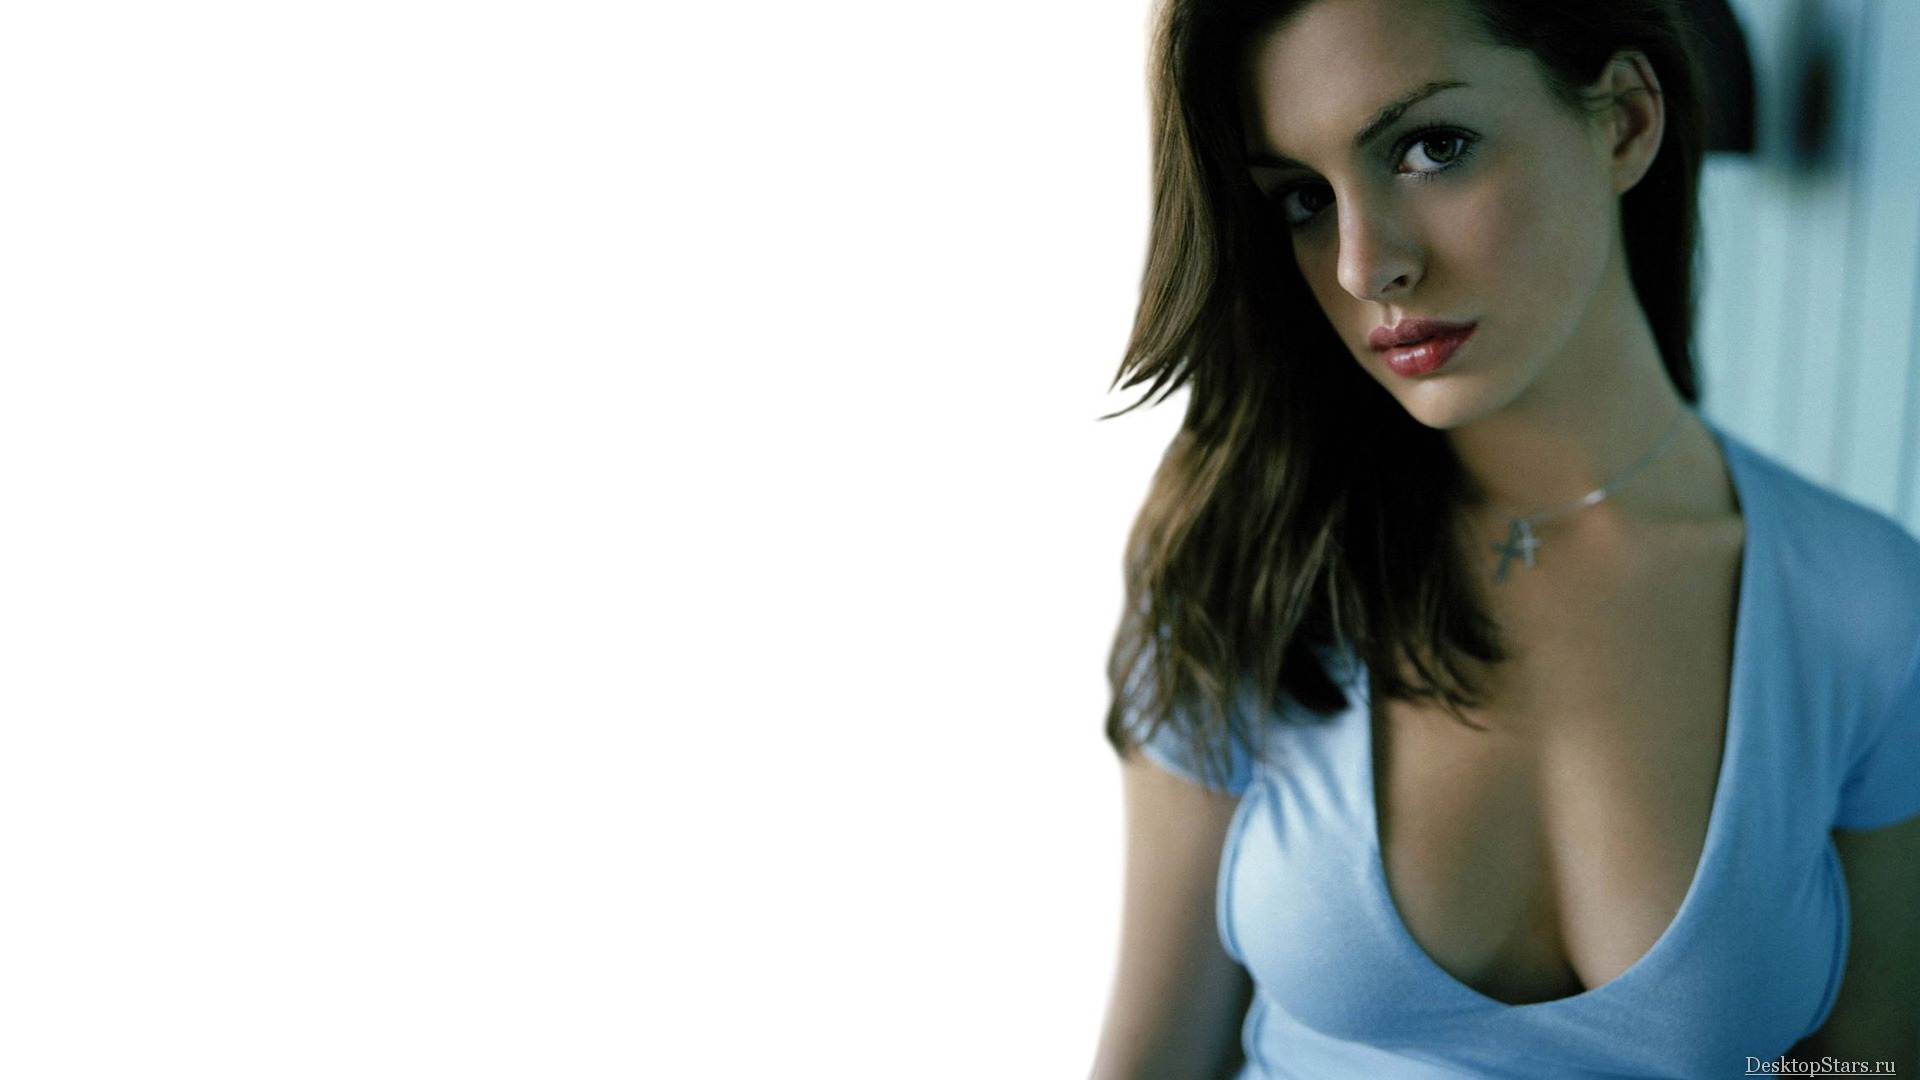 Anne Hathaway #027 - 1920x1080 Wallpapers Pictures Photos Images